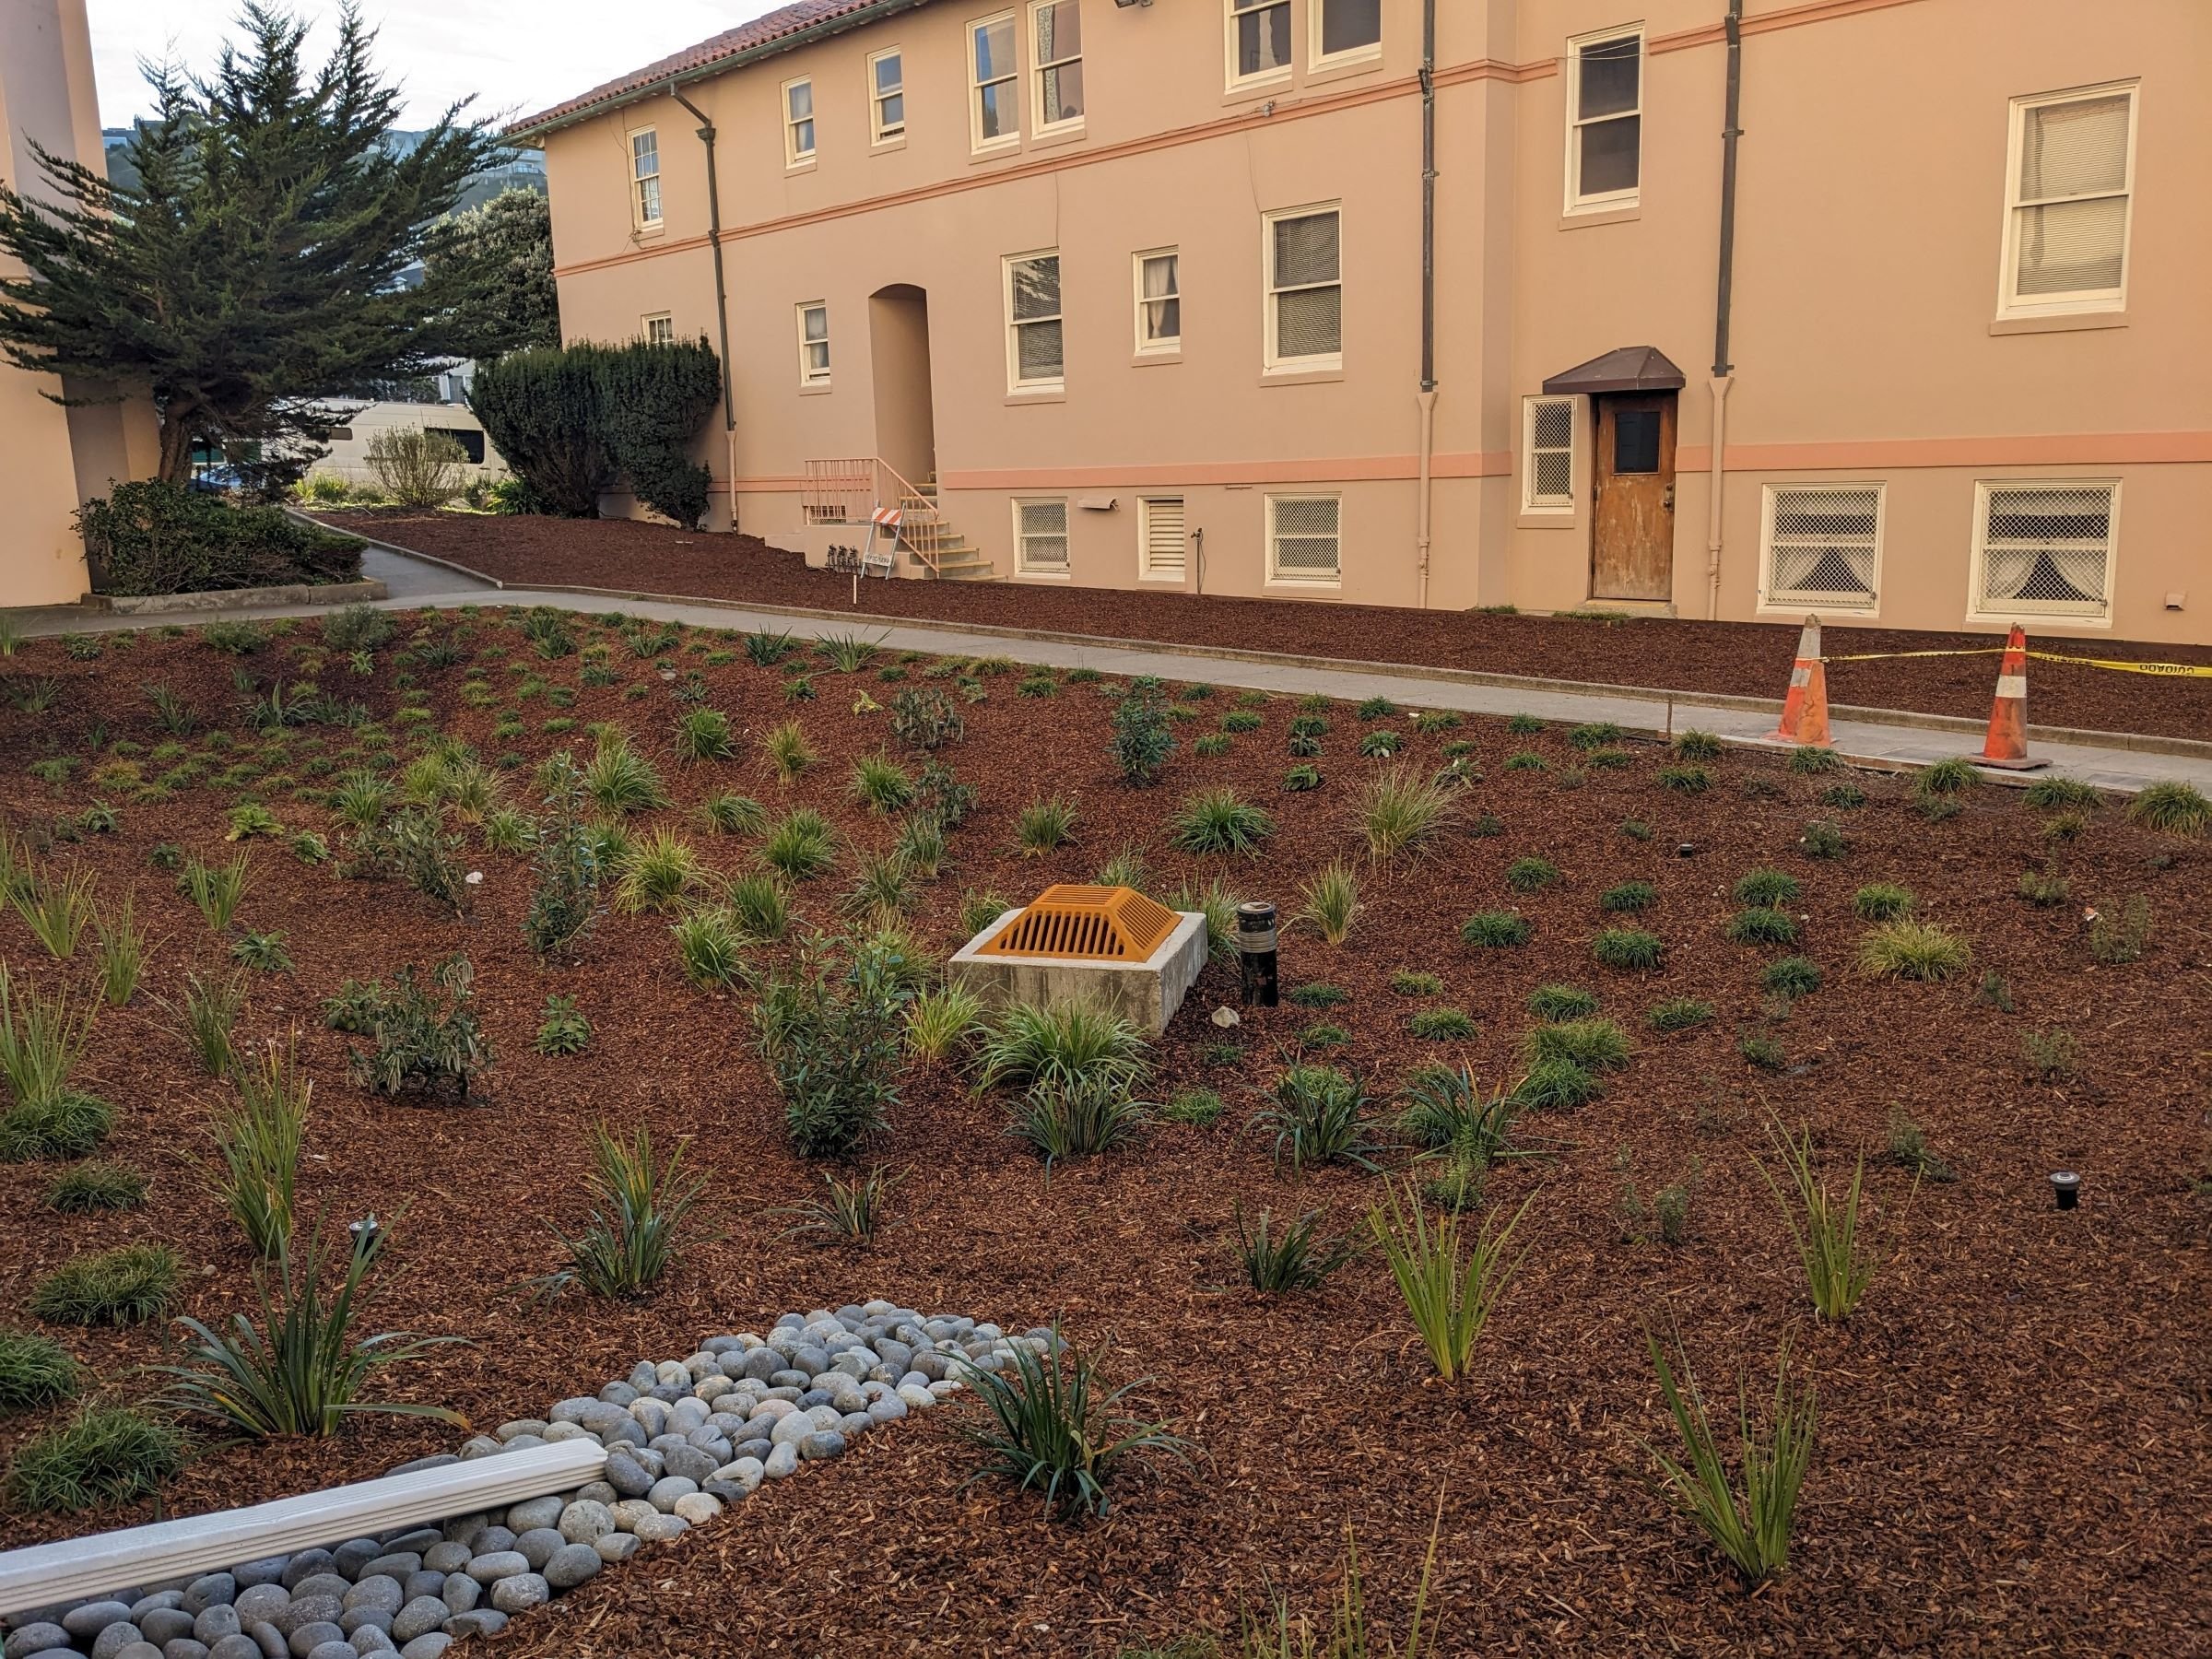 Rain garden and downspout disconnect at St. Anne Church